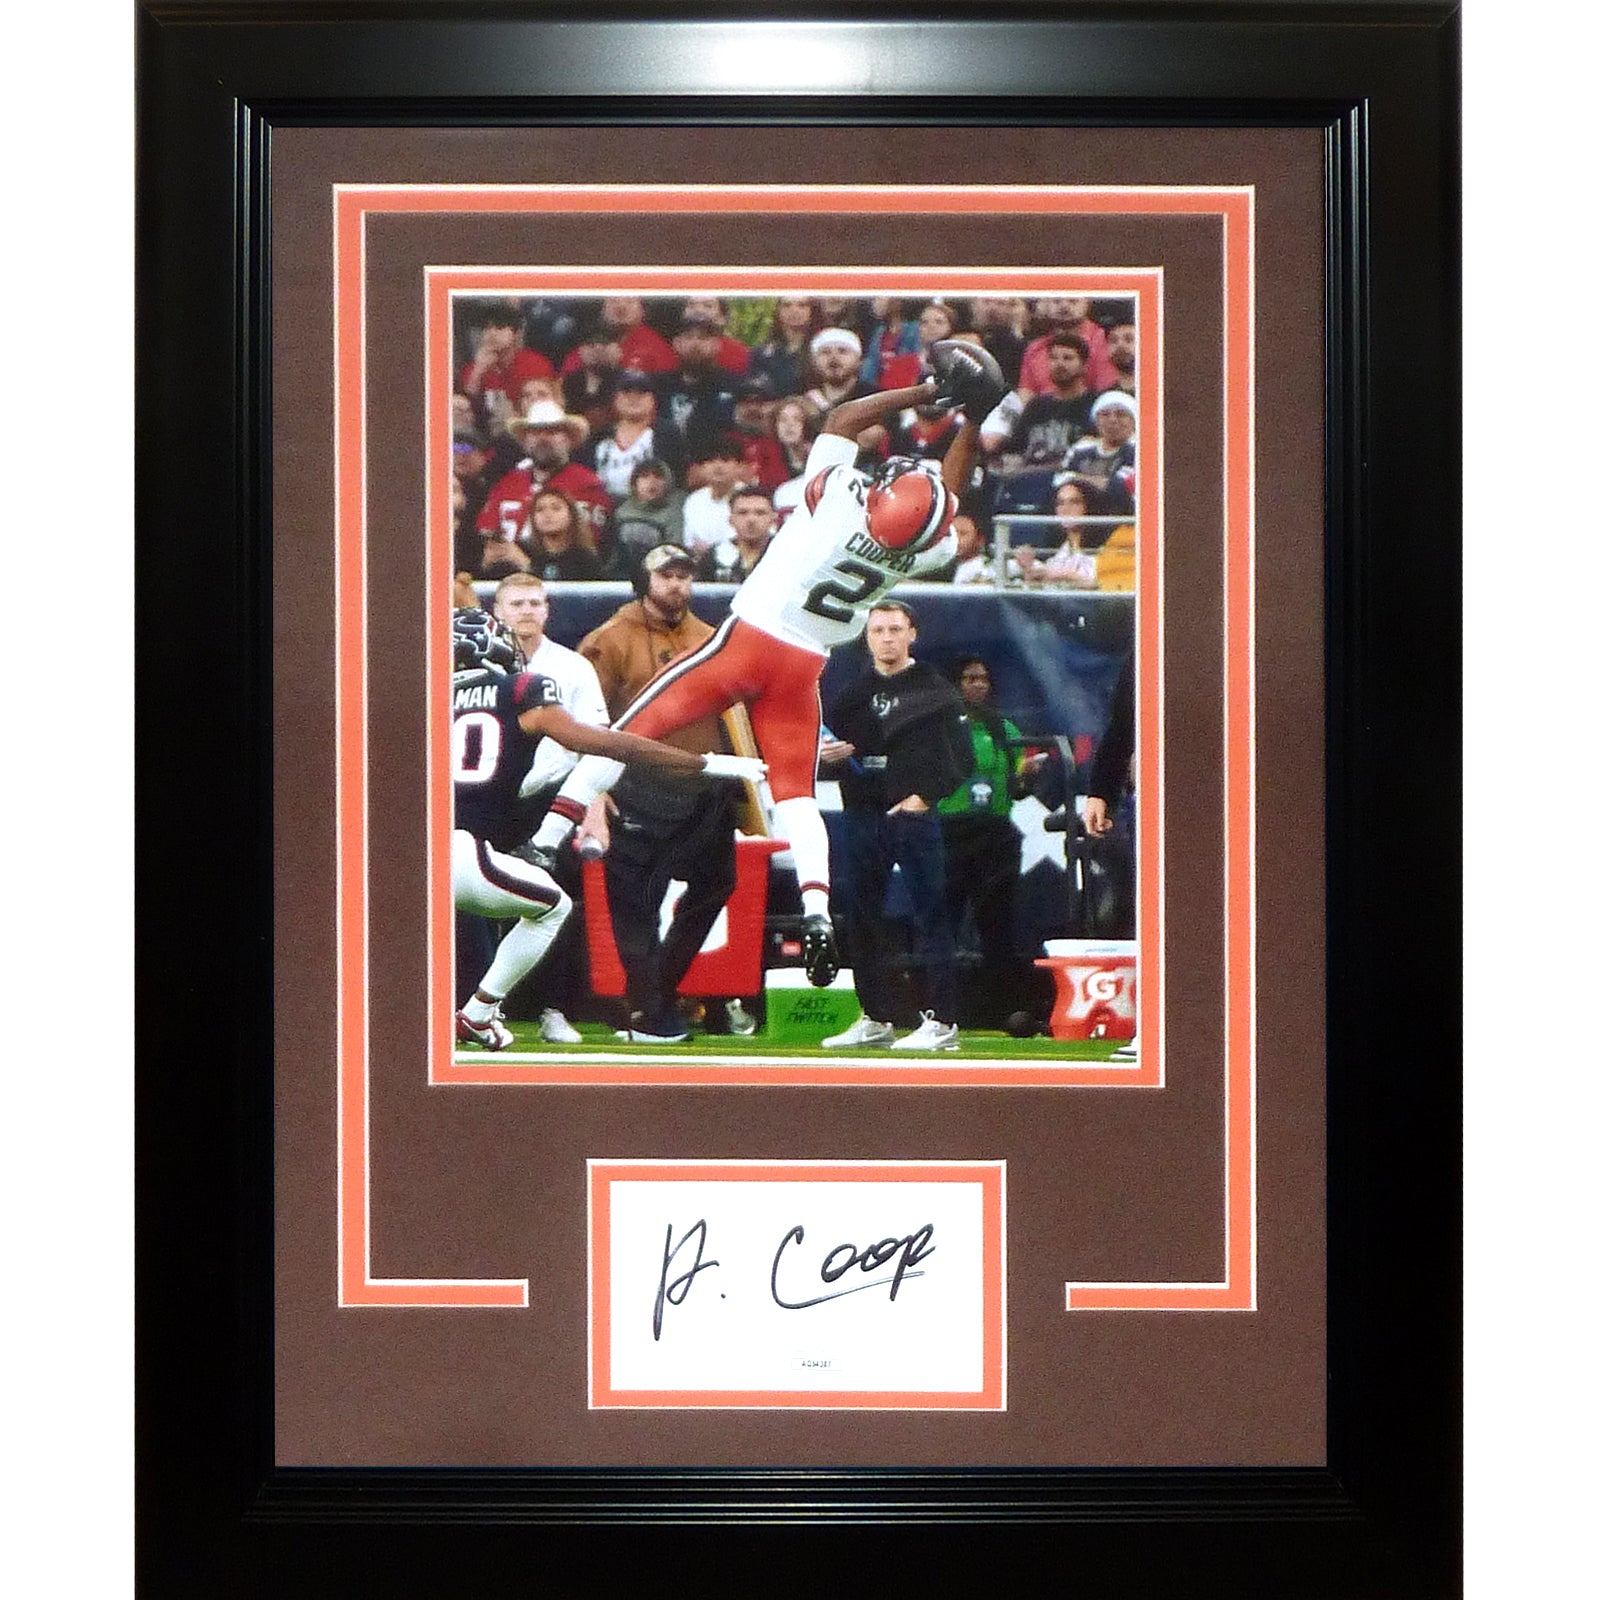 Amari Cooper Autographed Cleveland Browns (265 Receiving Yards Game) 